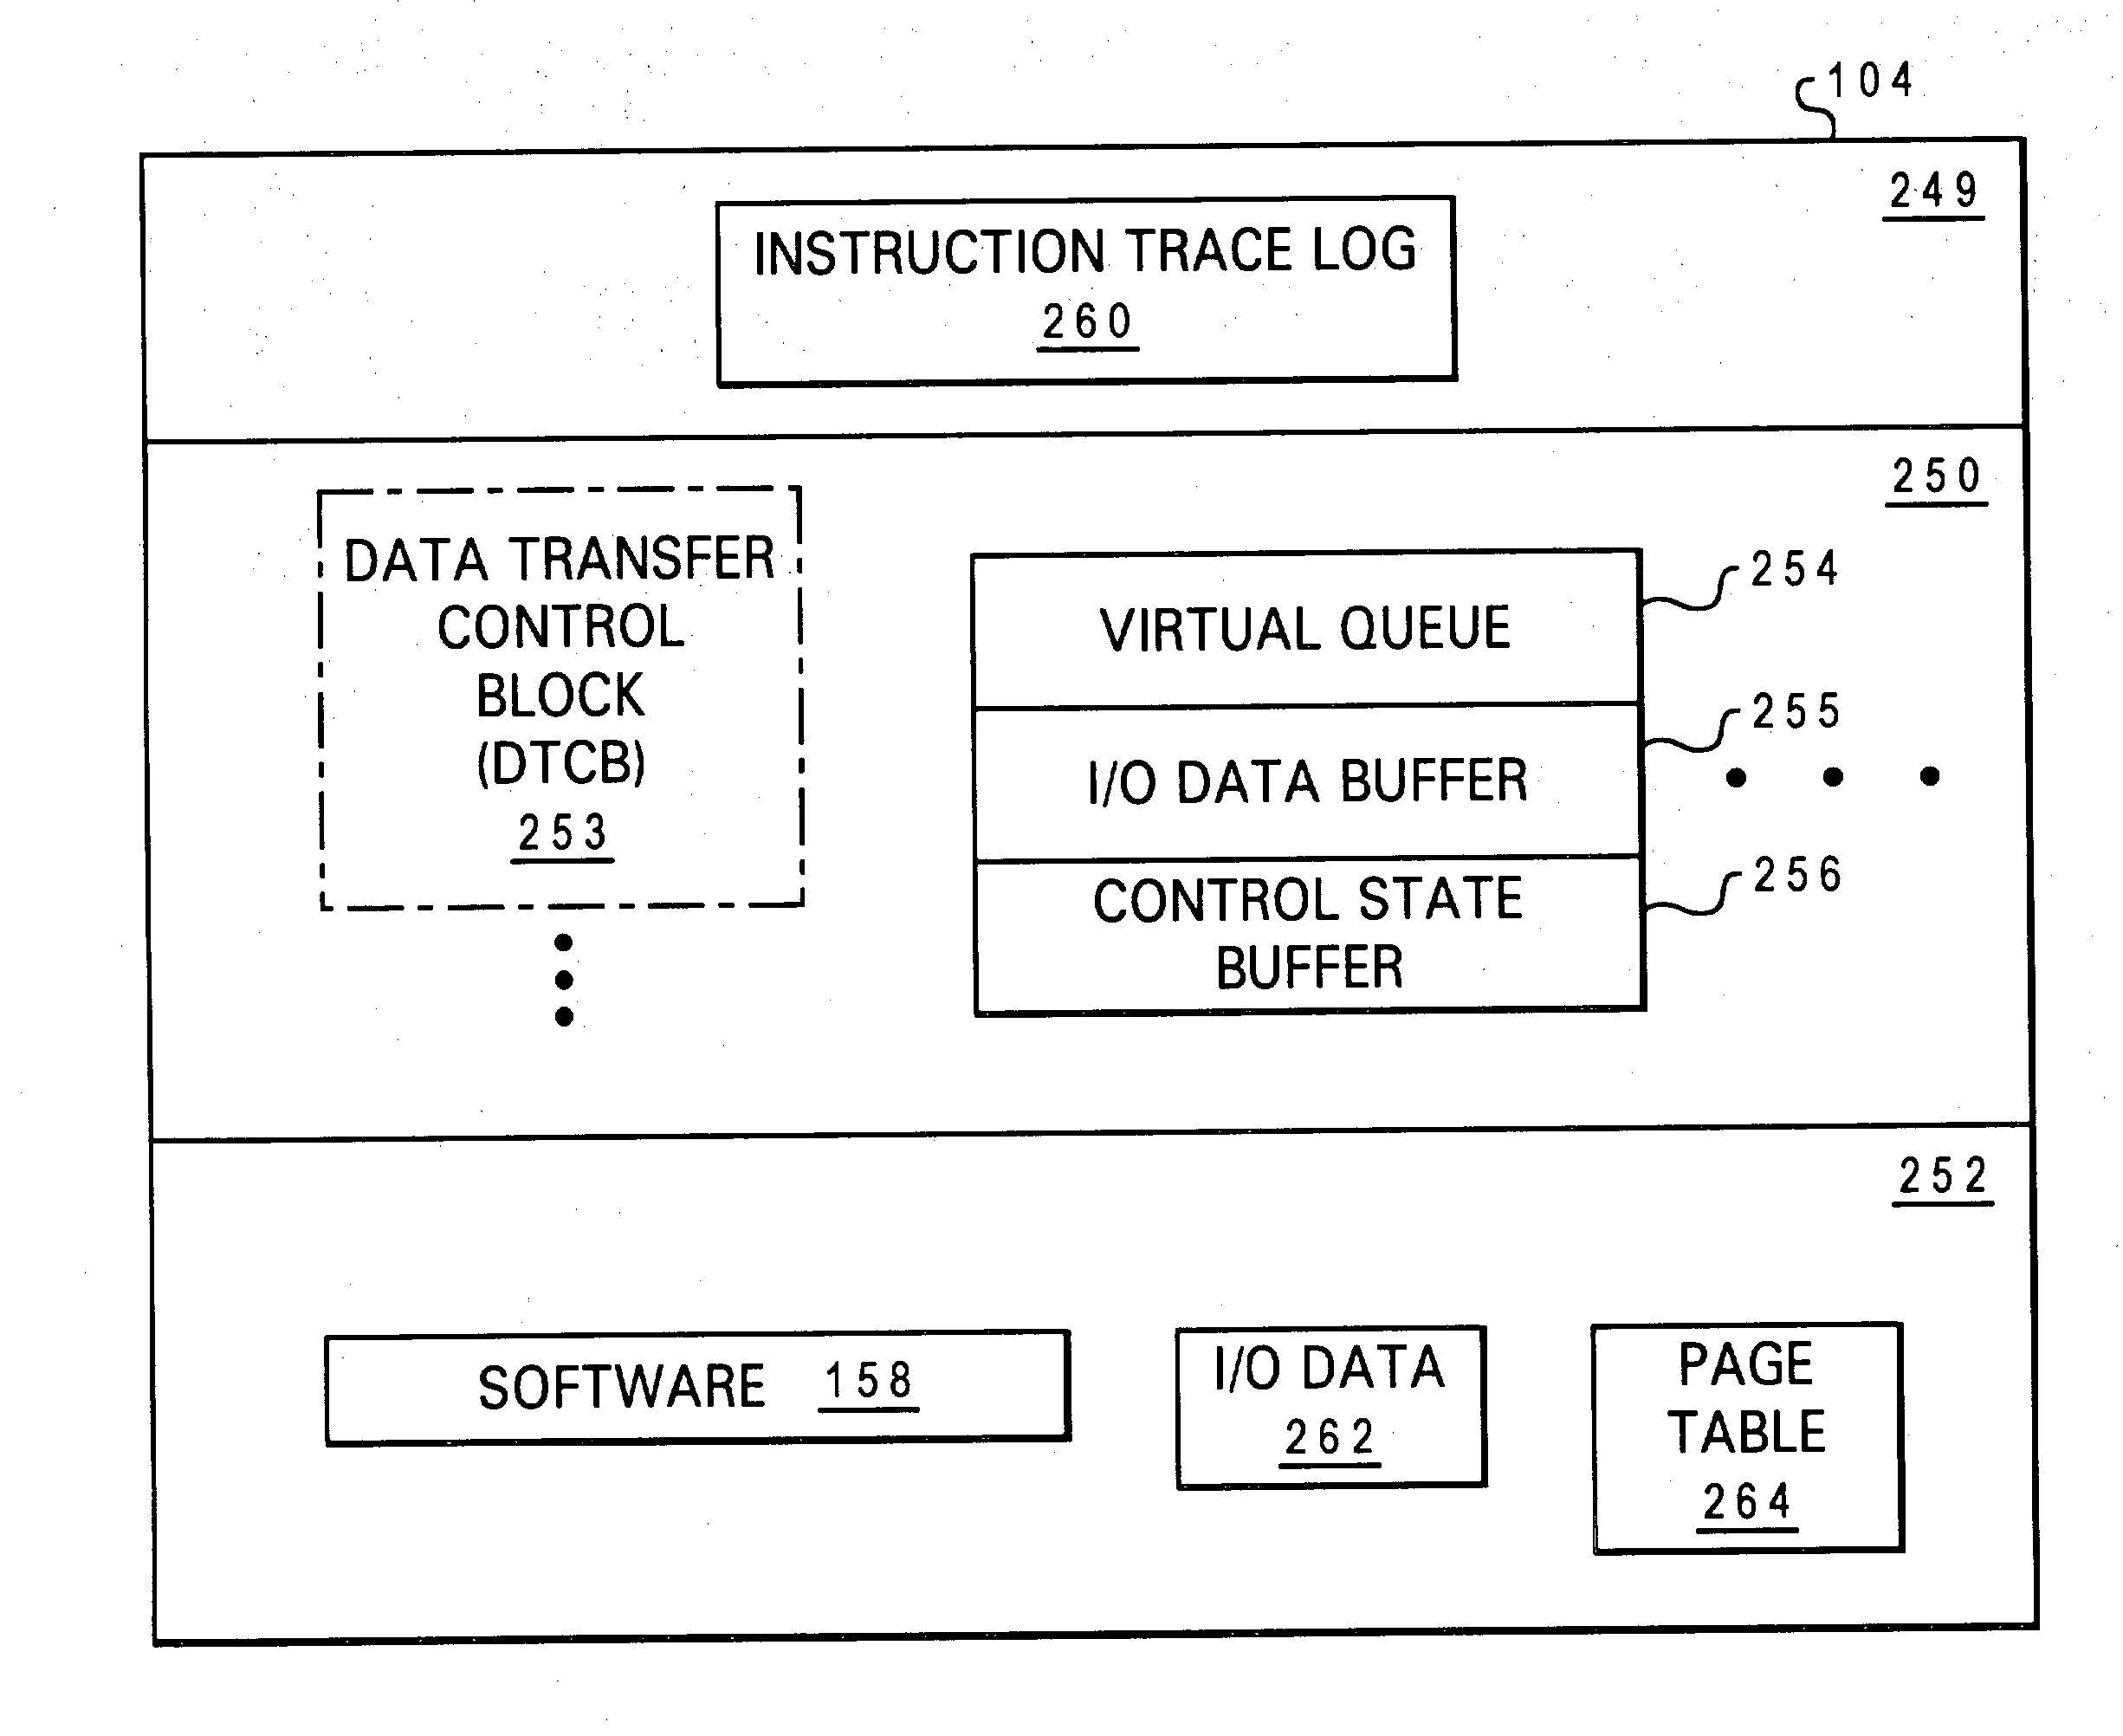 Hardware-enabled instruction tracing